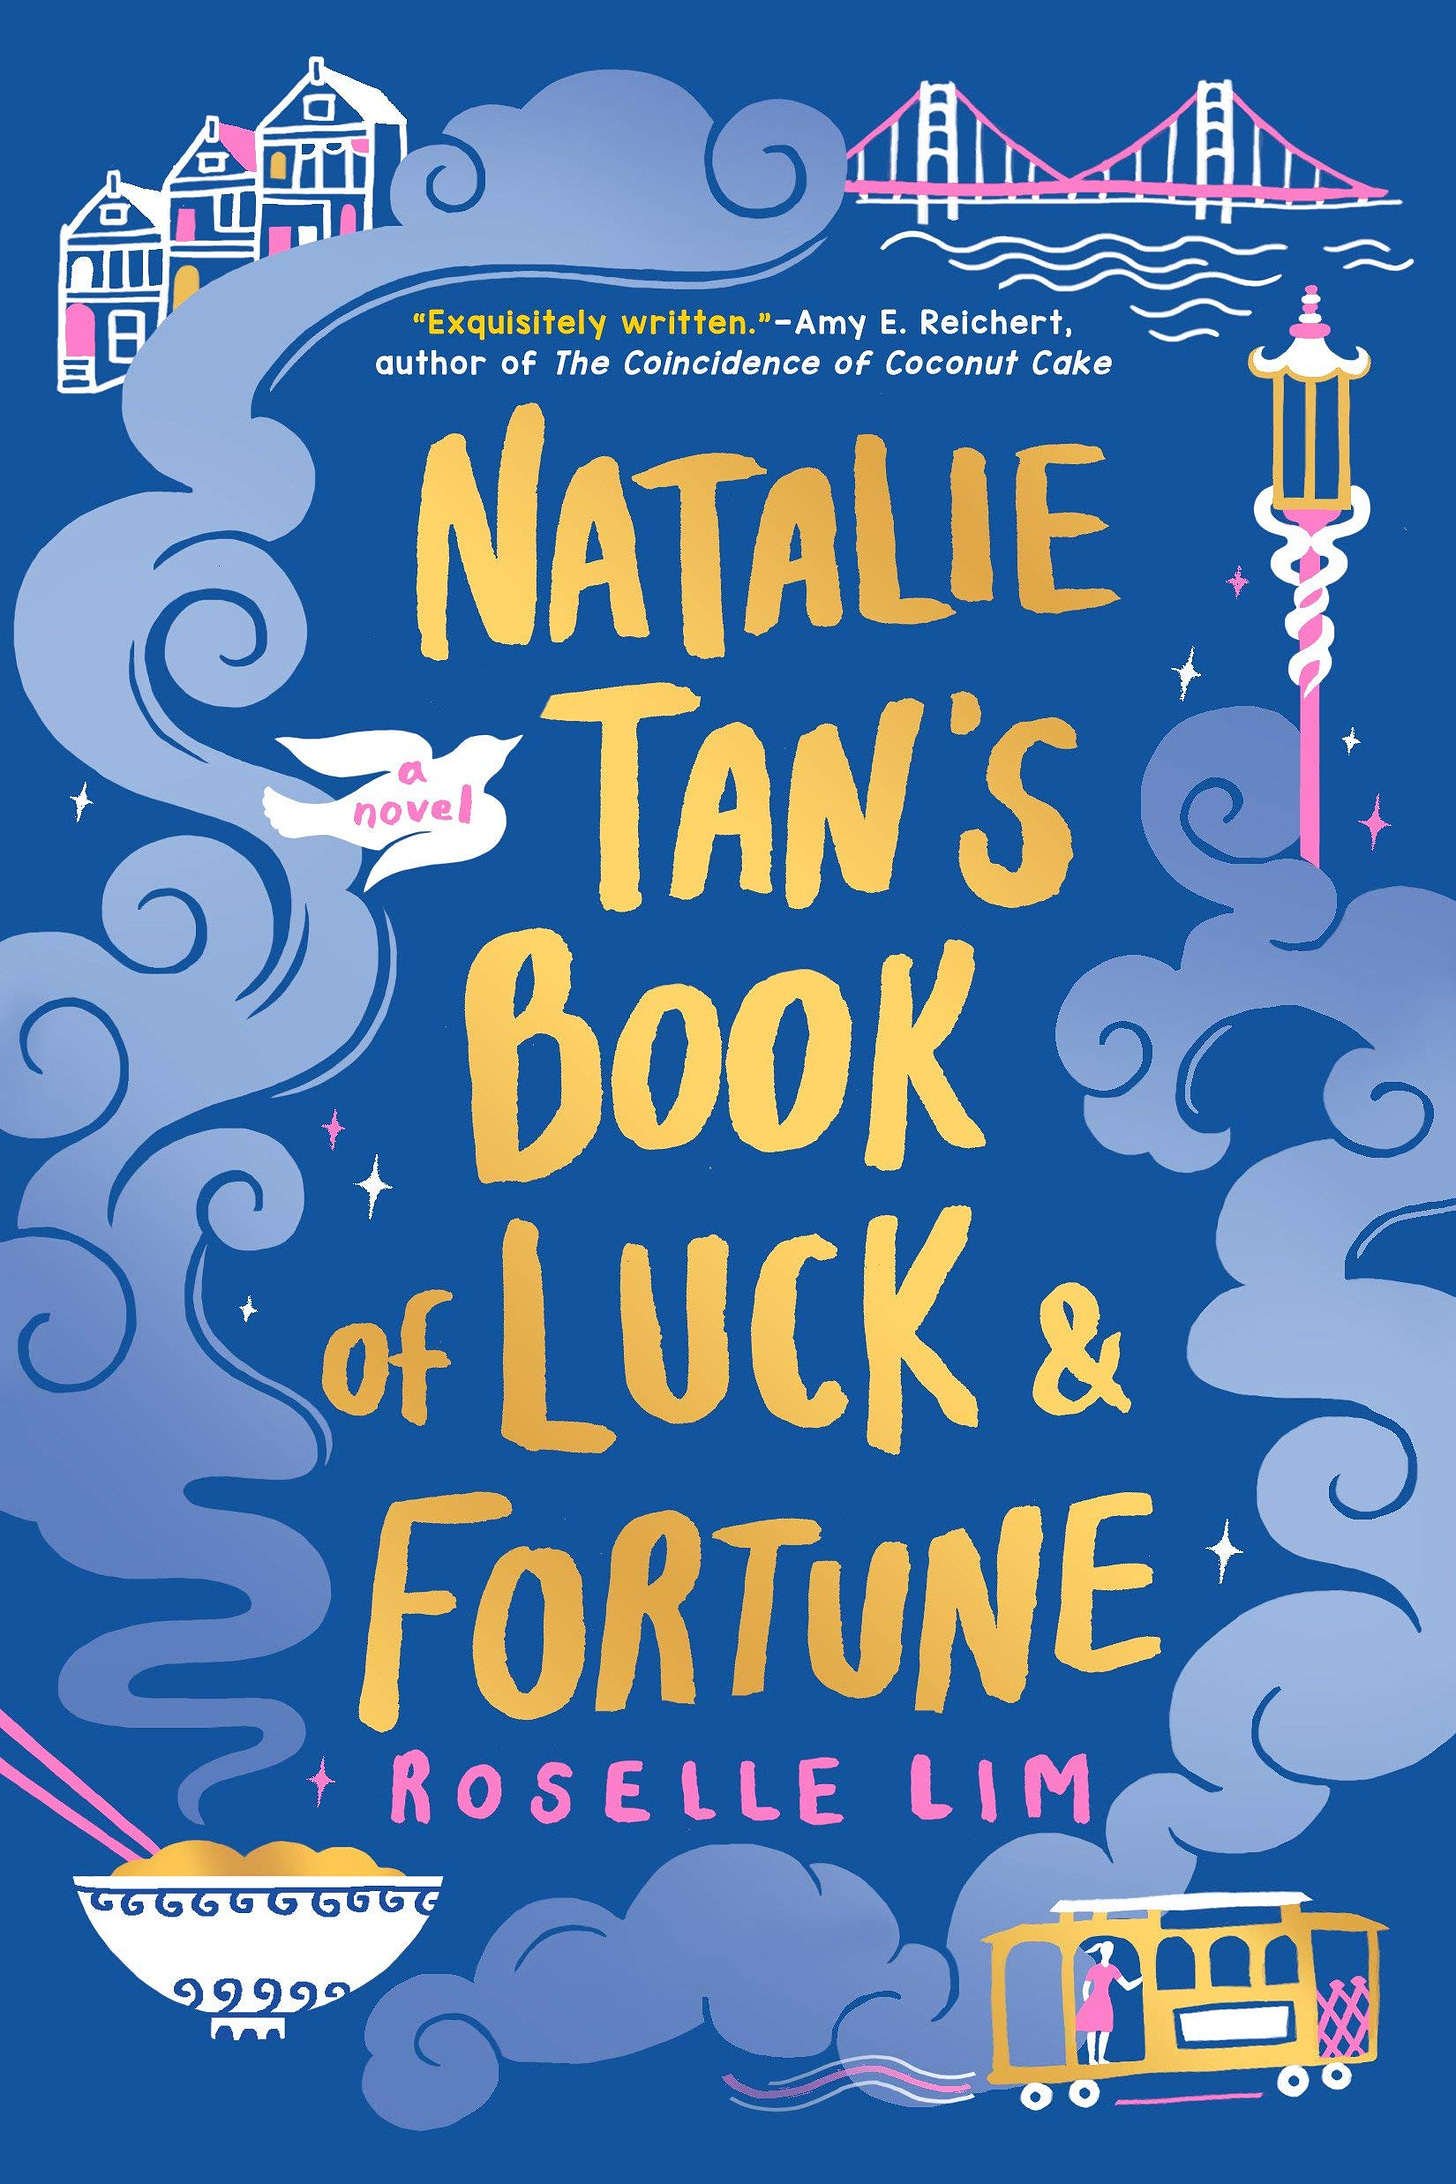 Cover of Natalie Tan’s Book of Luck & Fortune by Roselle Lim 